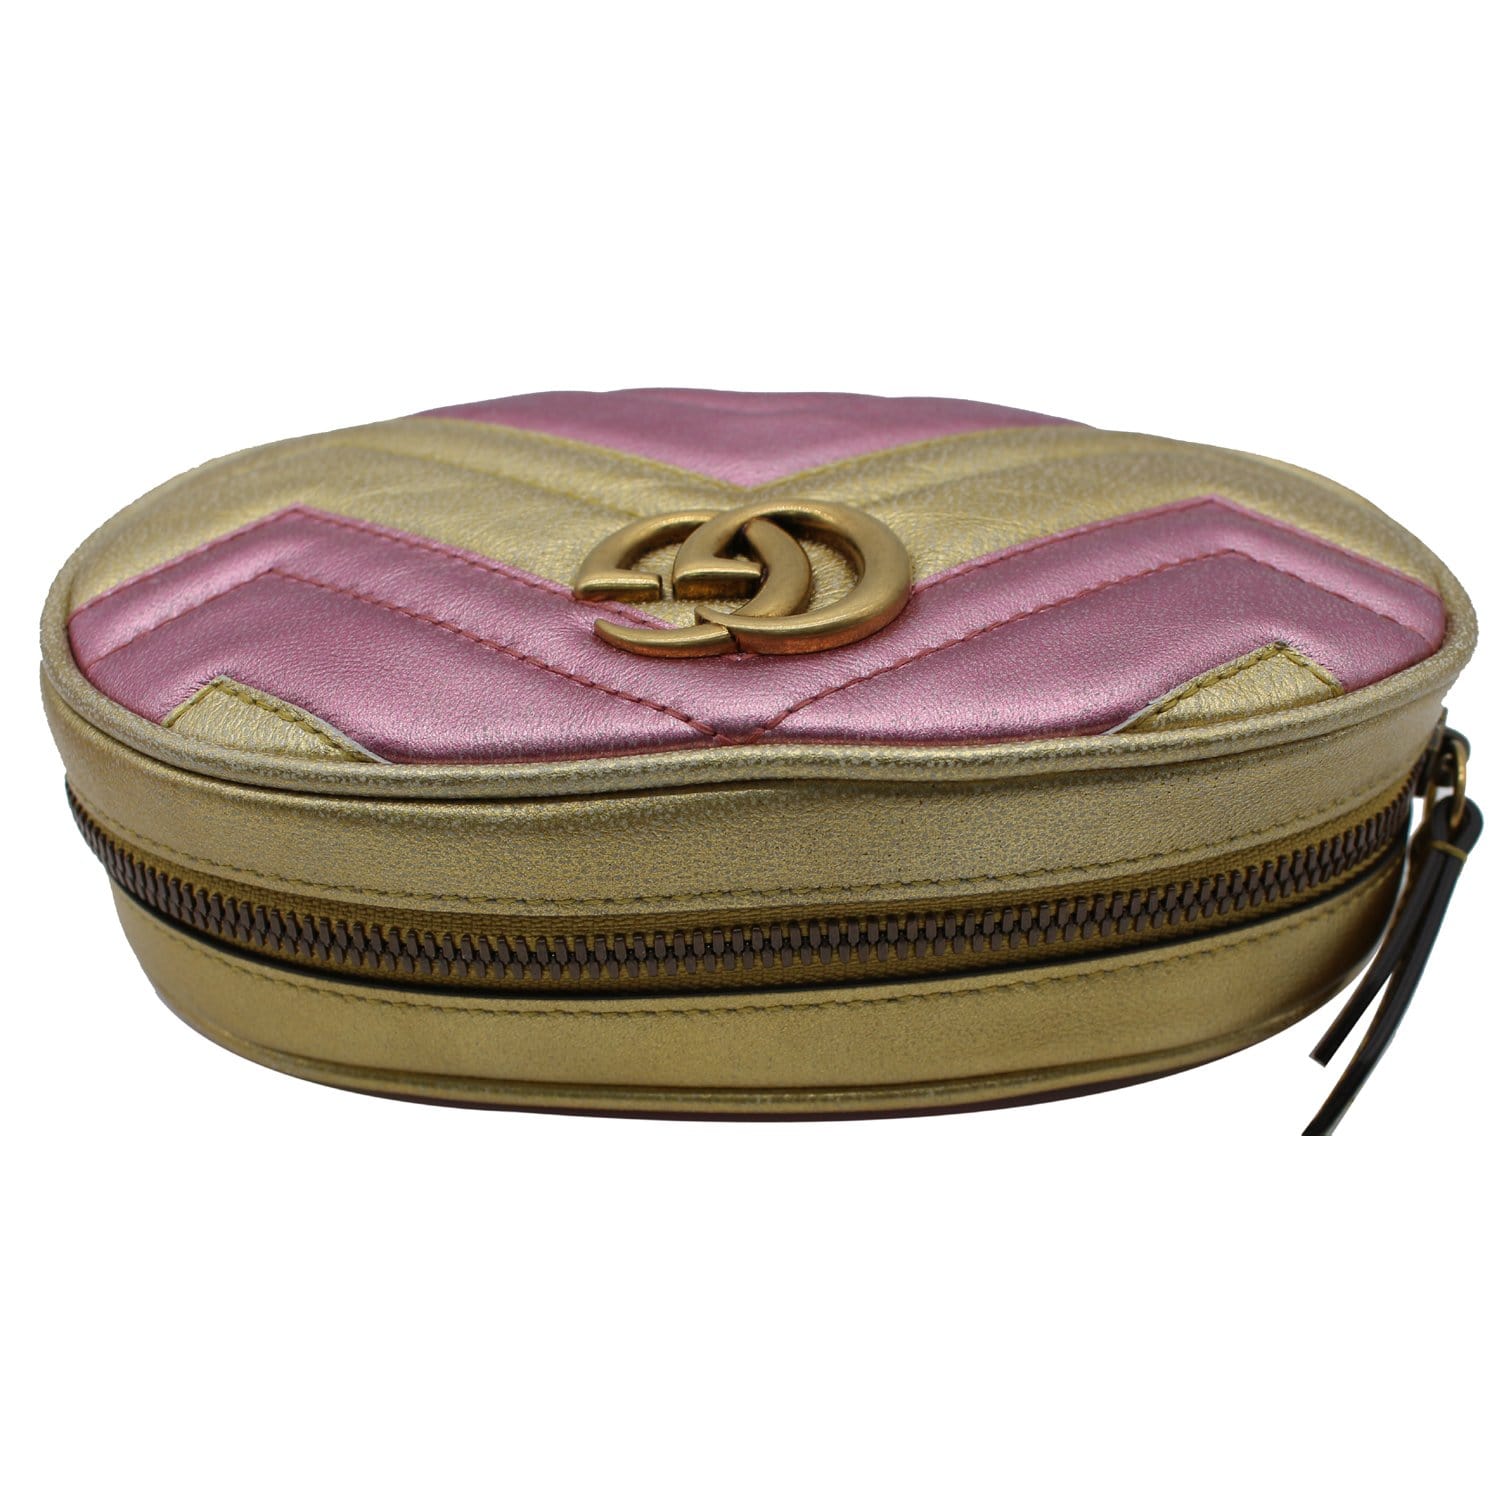 Gucci Belt Bag Gucci Print Grained Pink in Calfskin with Aged Gold